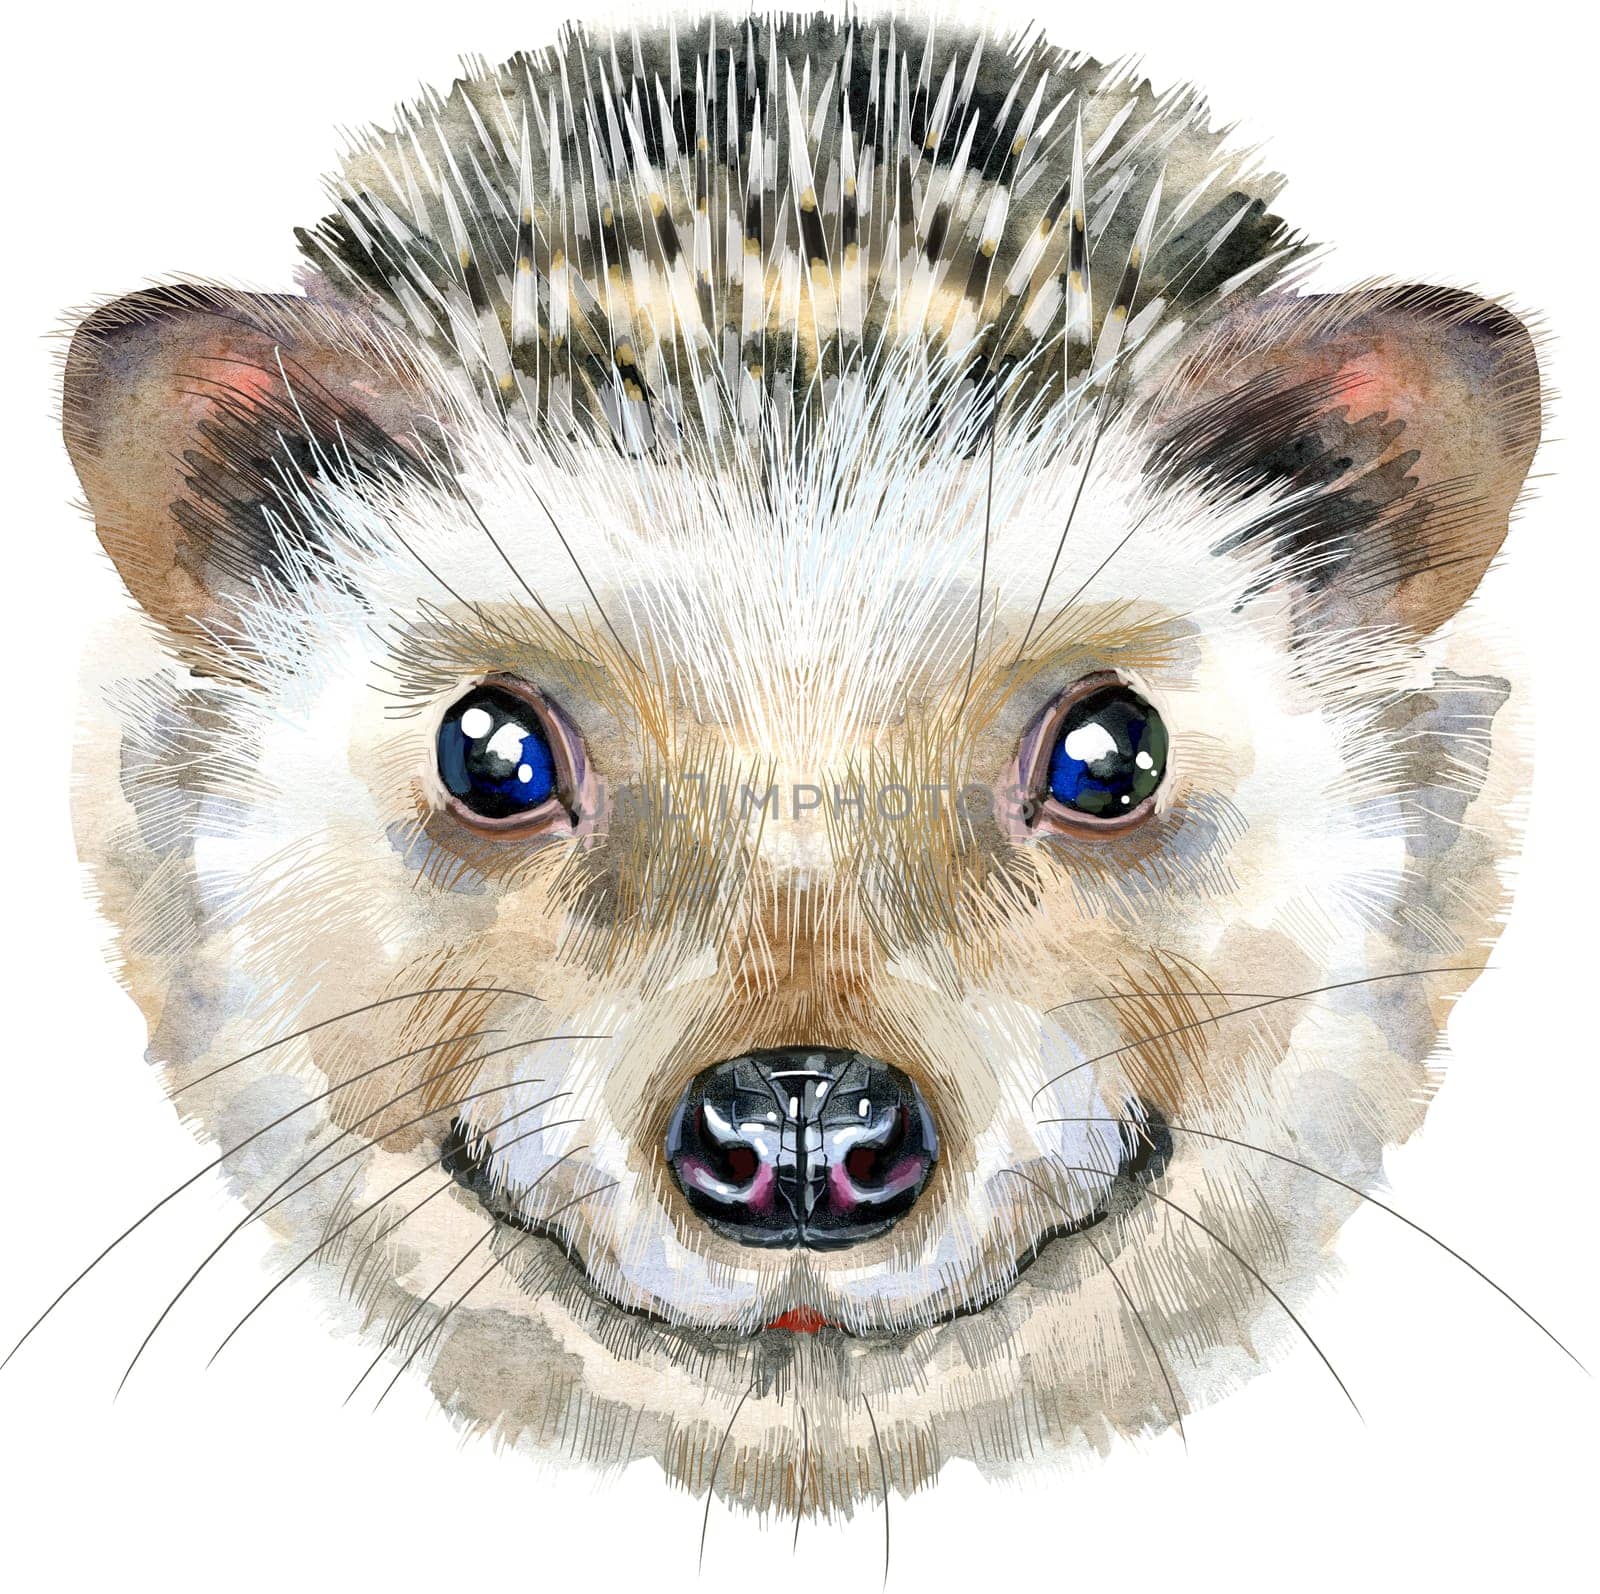 Watercolor portrait of a hedgehog on white background by NataOmsk